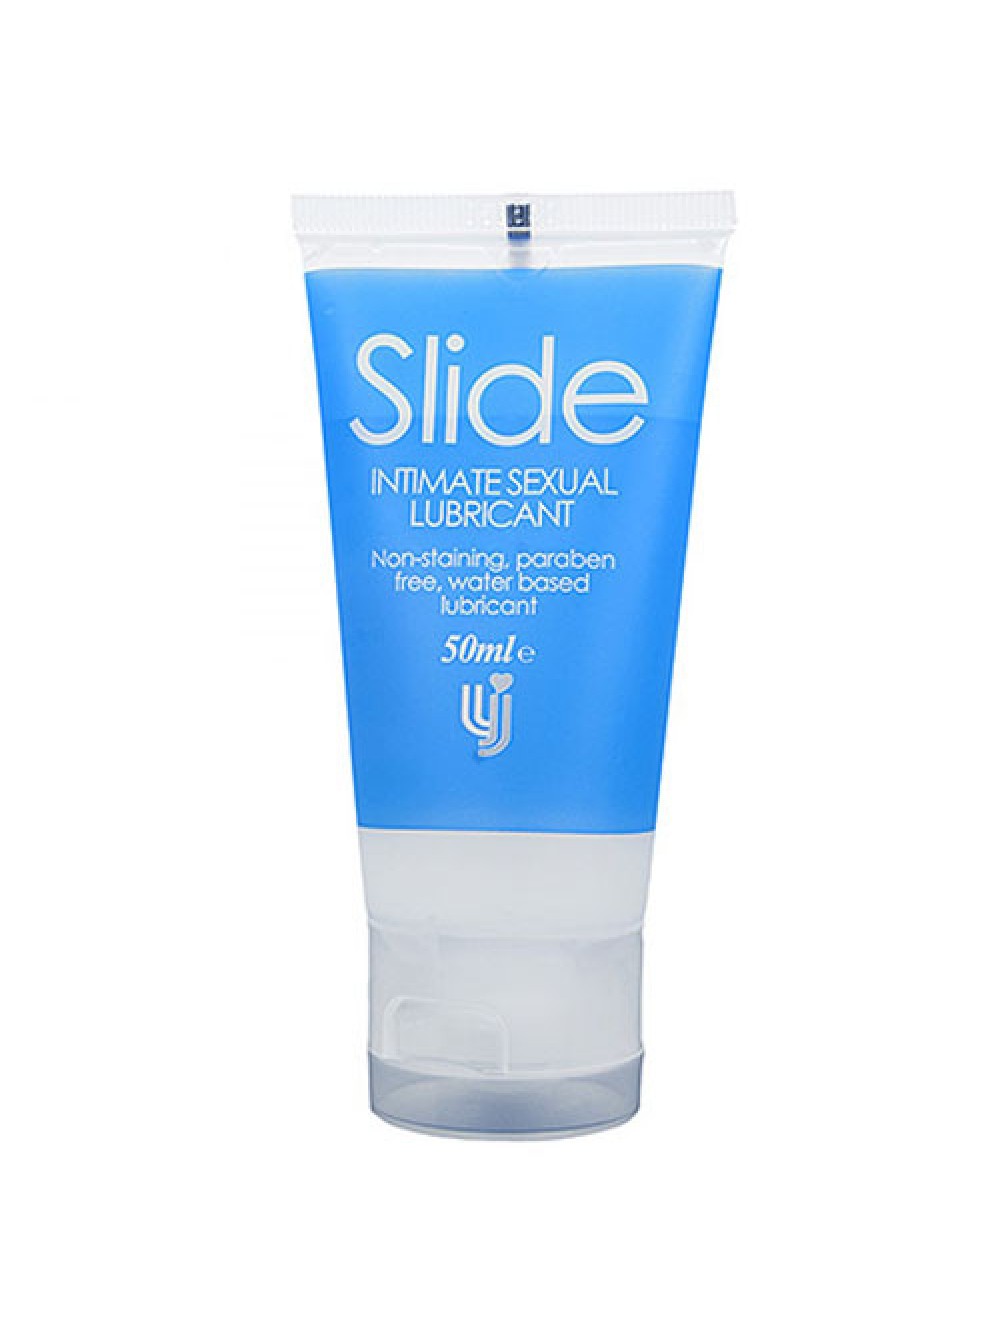 Slide Intimate Sexual Lubricant 50ml